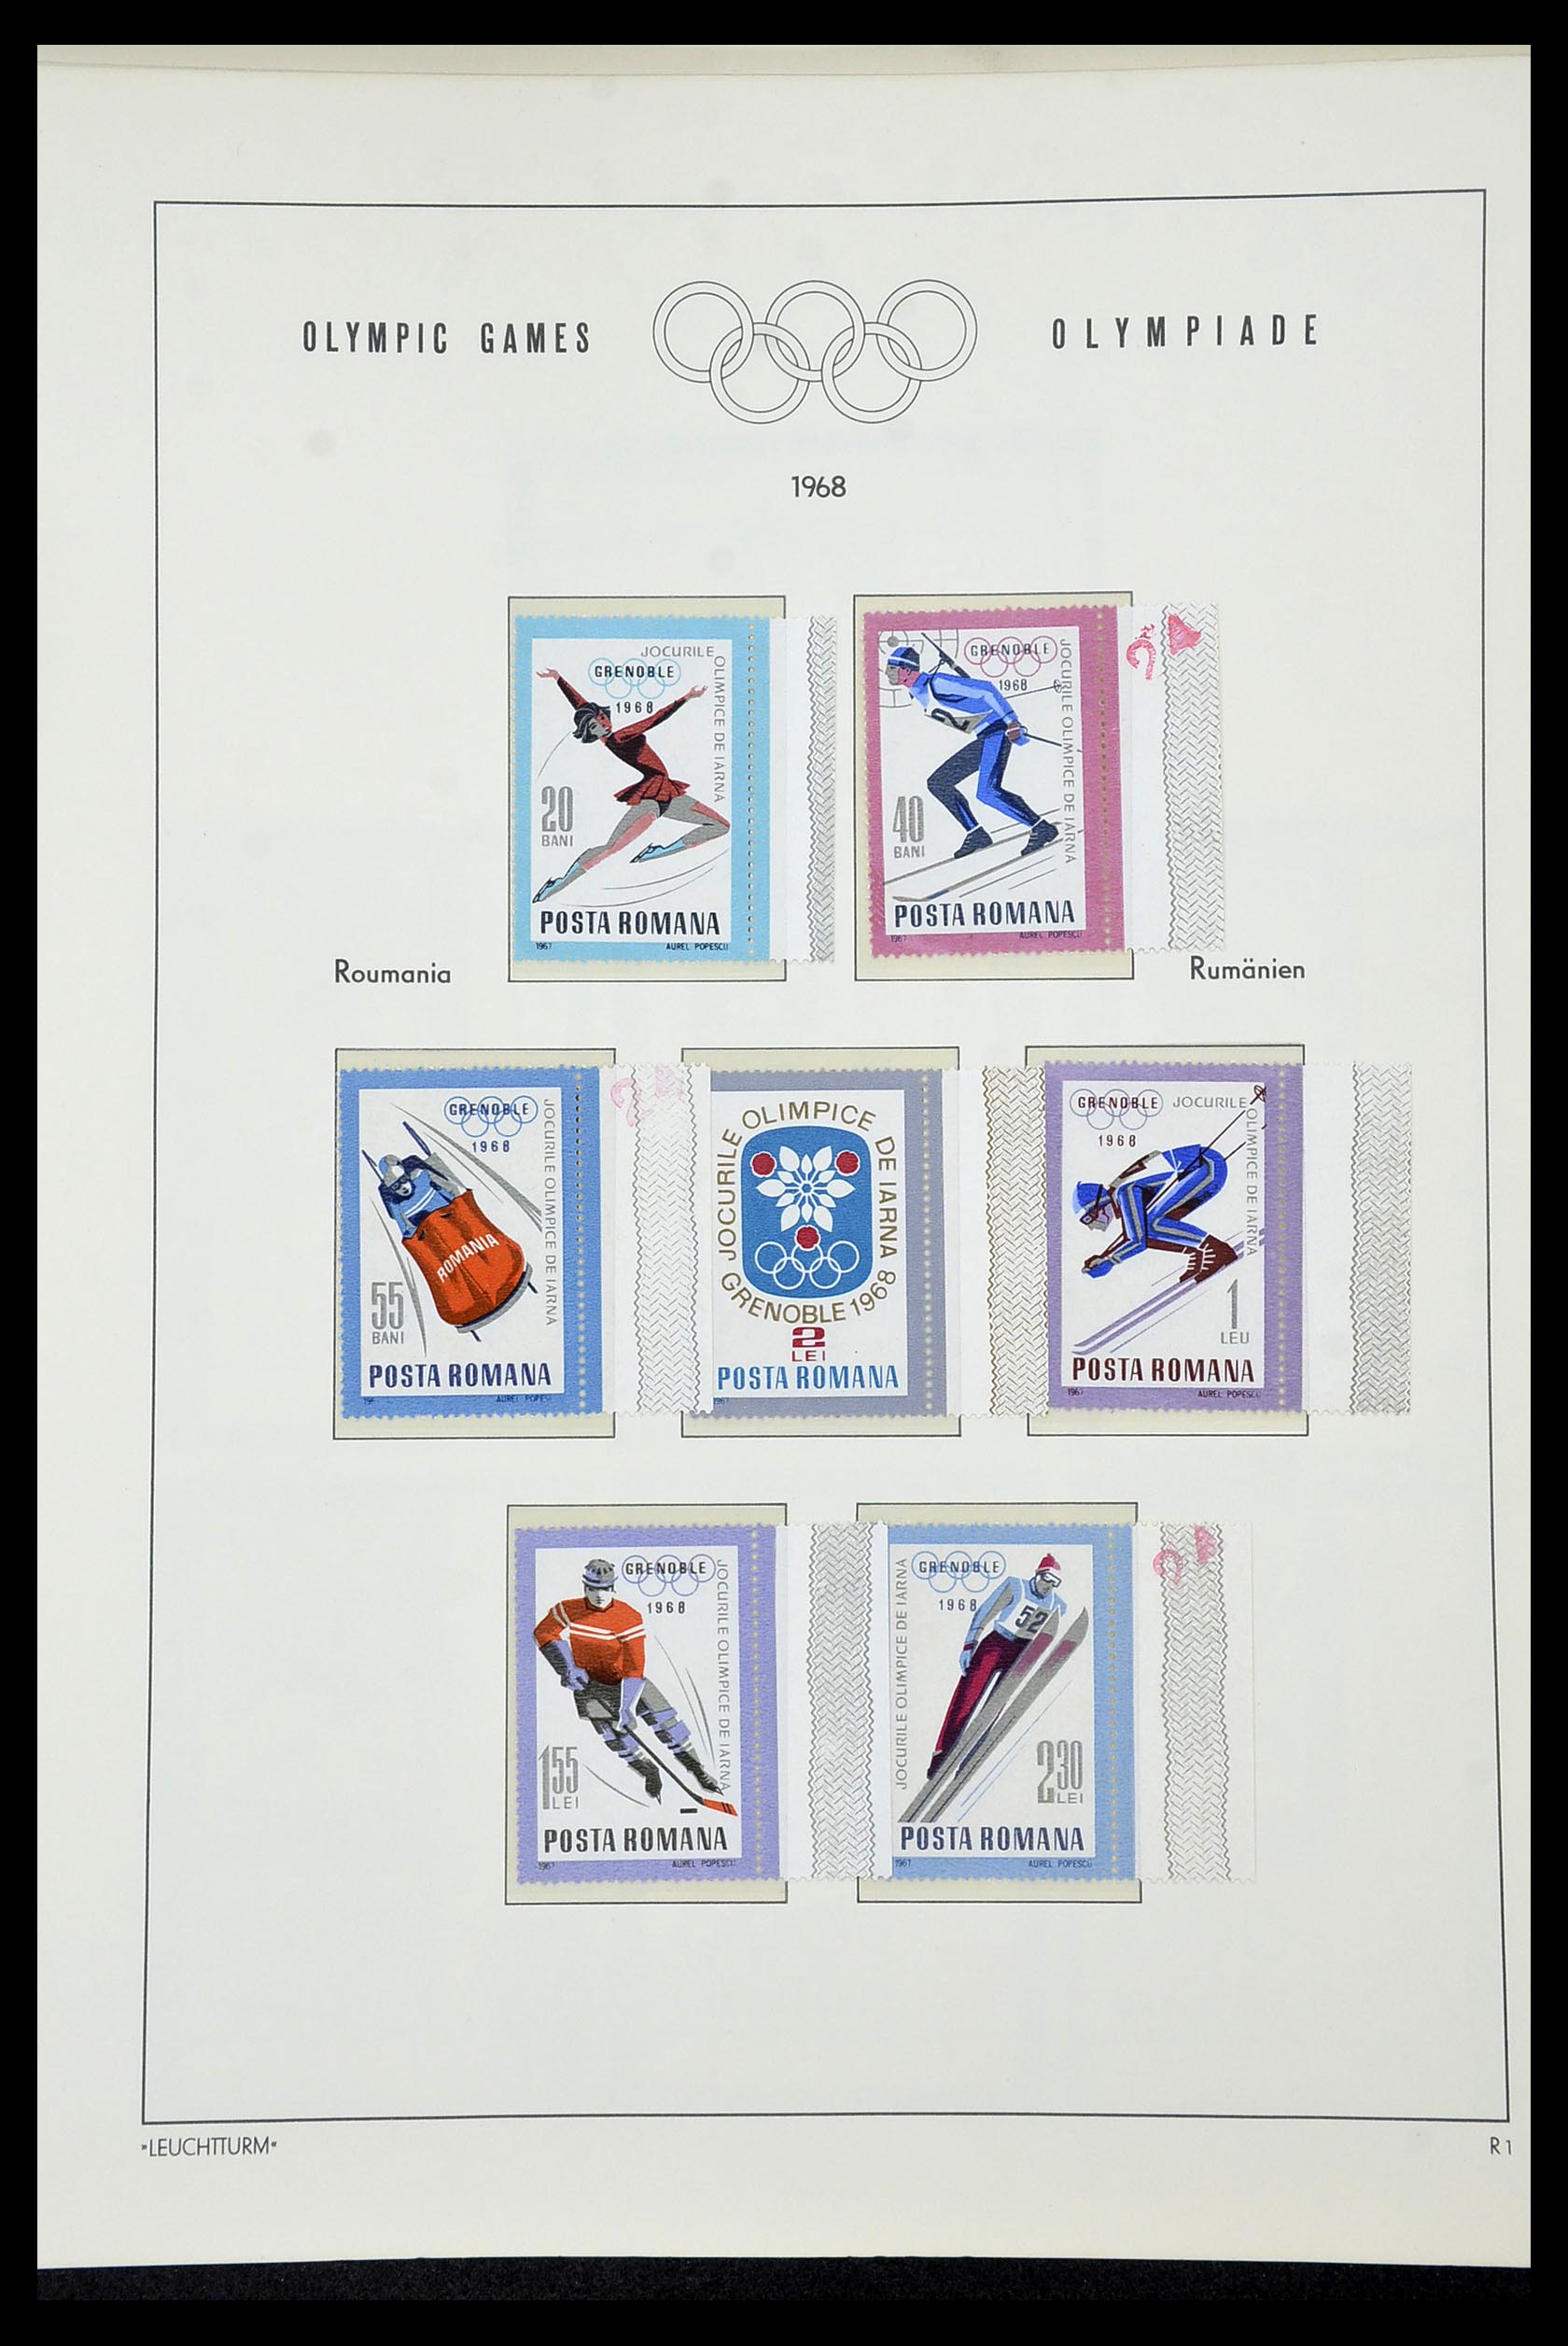 34431 096 - Stamp Collection 34431 Olympics 1964-1968.